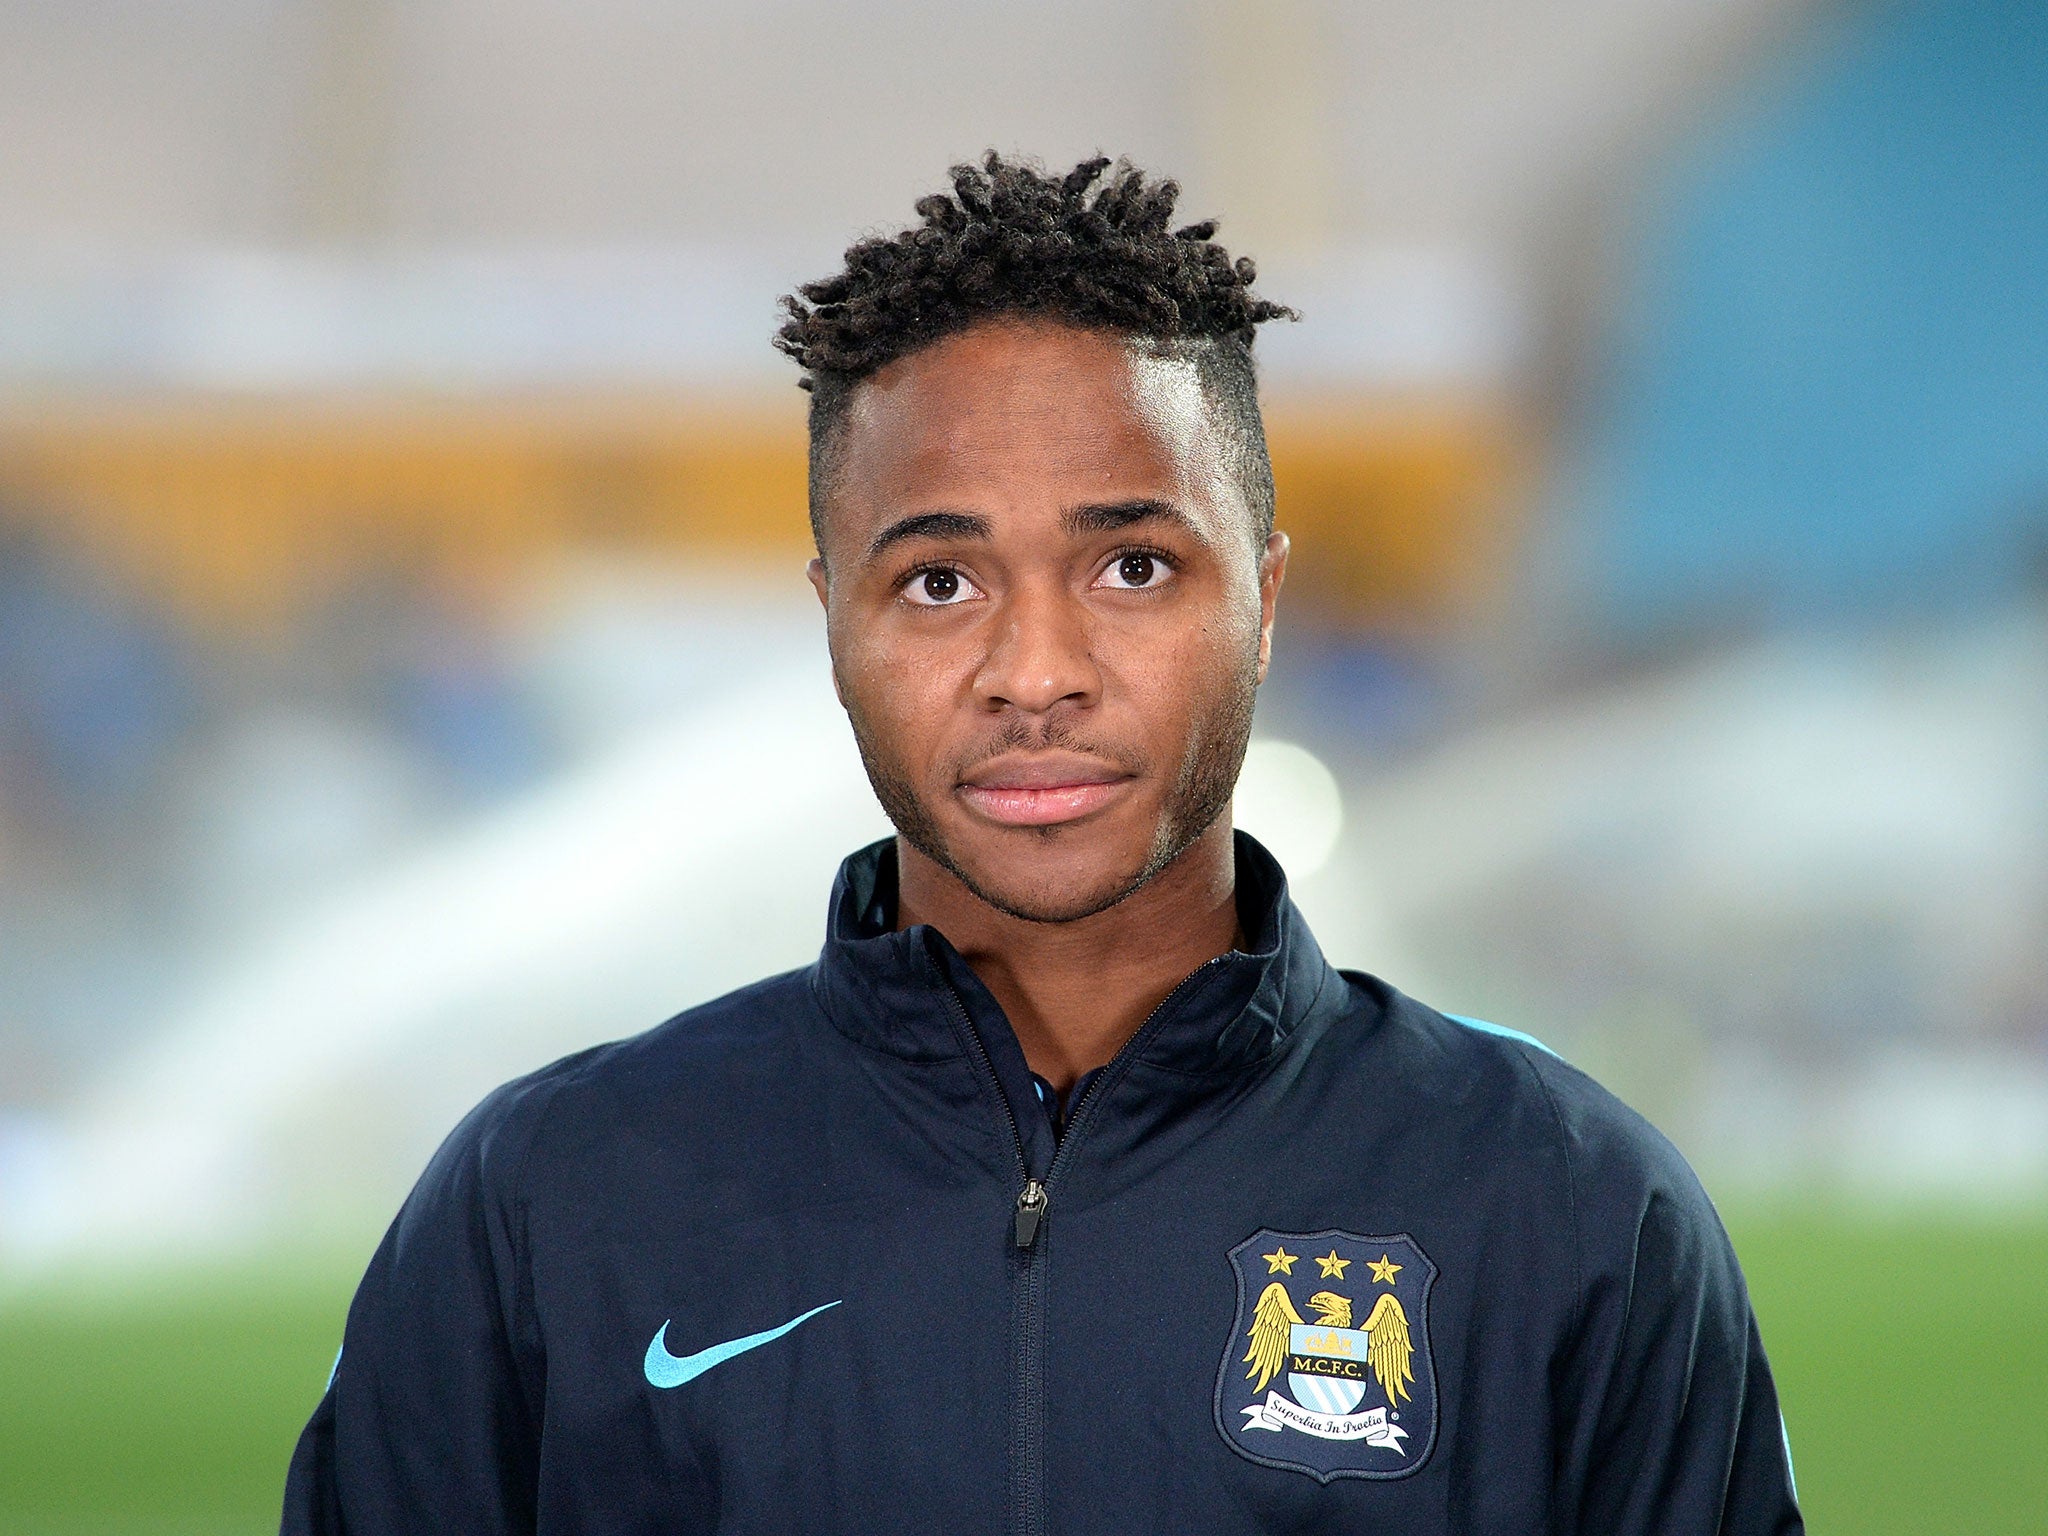 New Manchester City signing Raheem Sterling